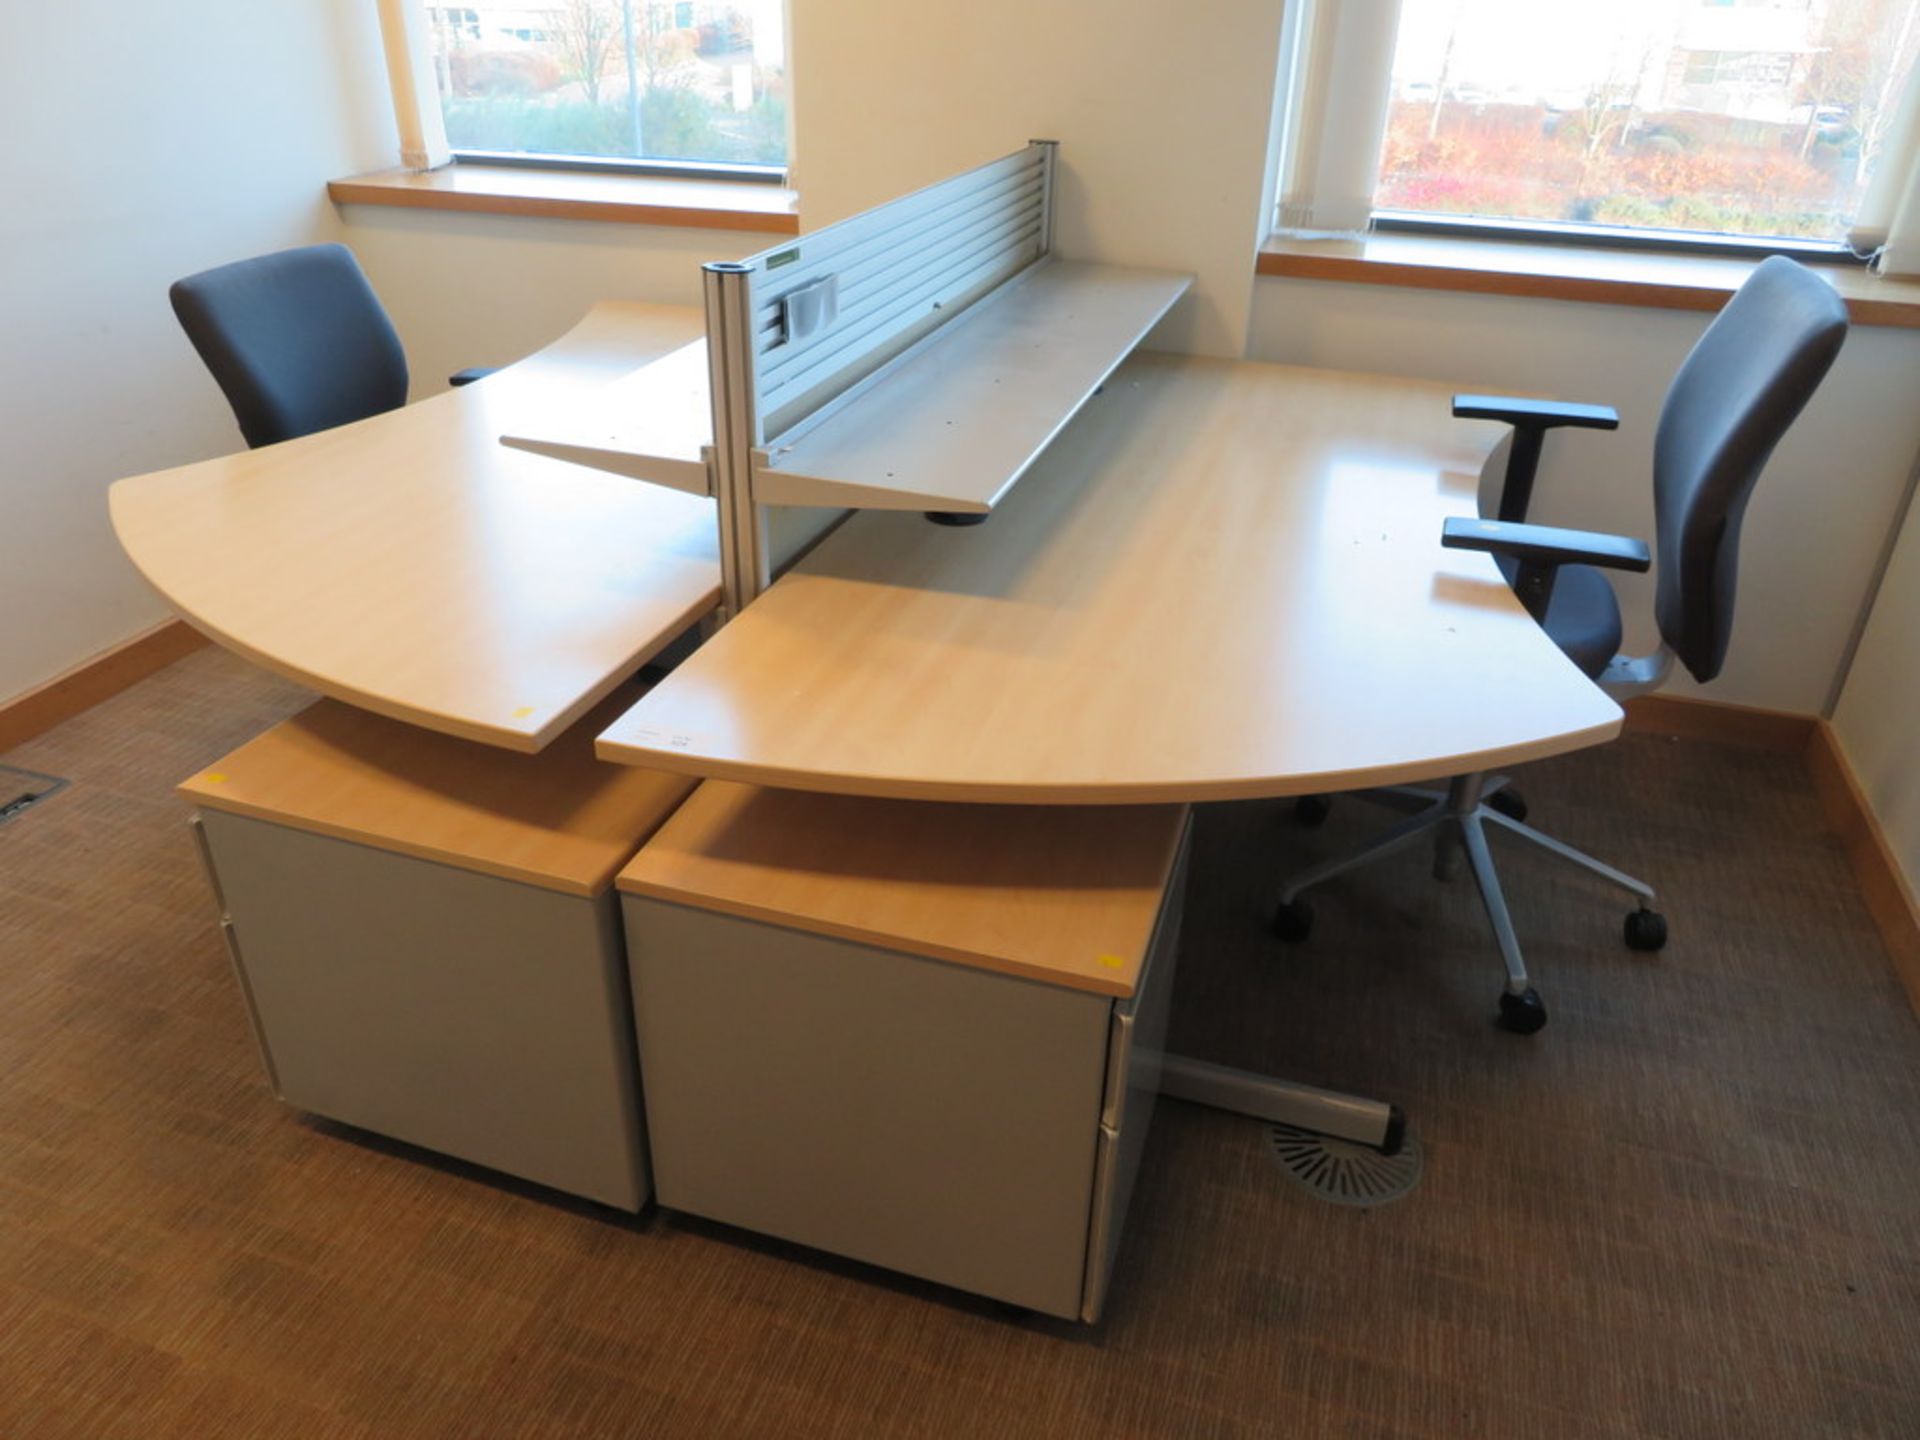 2 X LIGHTWOOD EFFECT CURVED FRONT OFFICE DESKS WITH DIVIDER, 2 X SWIVEL - Image 2 of 2